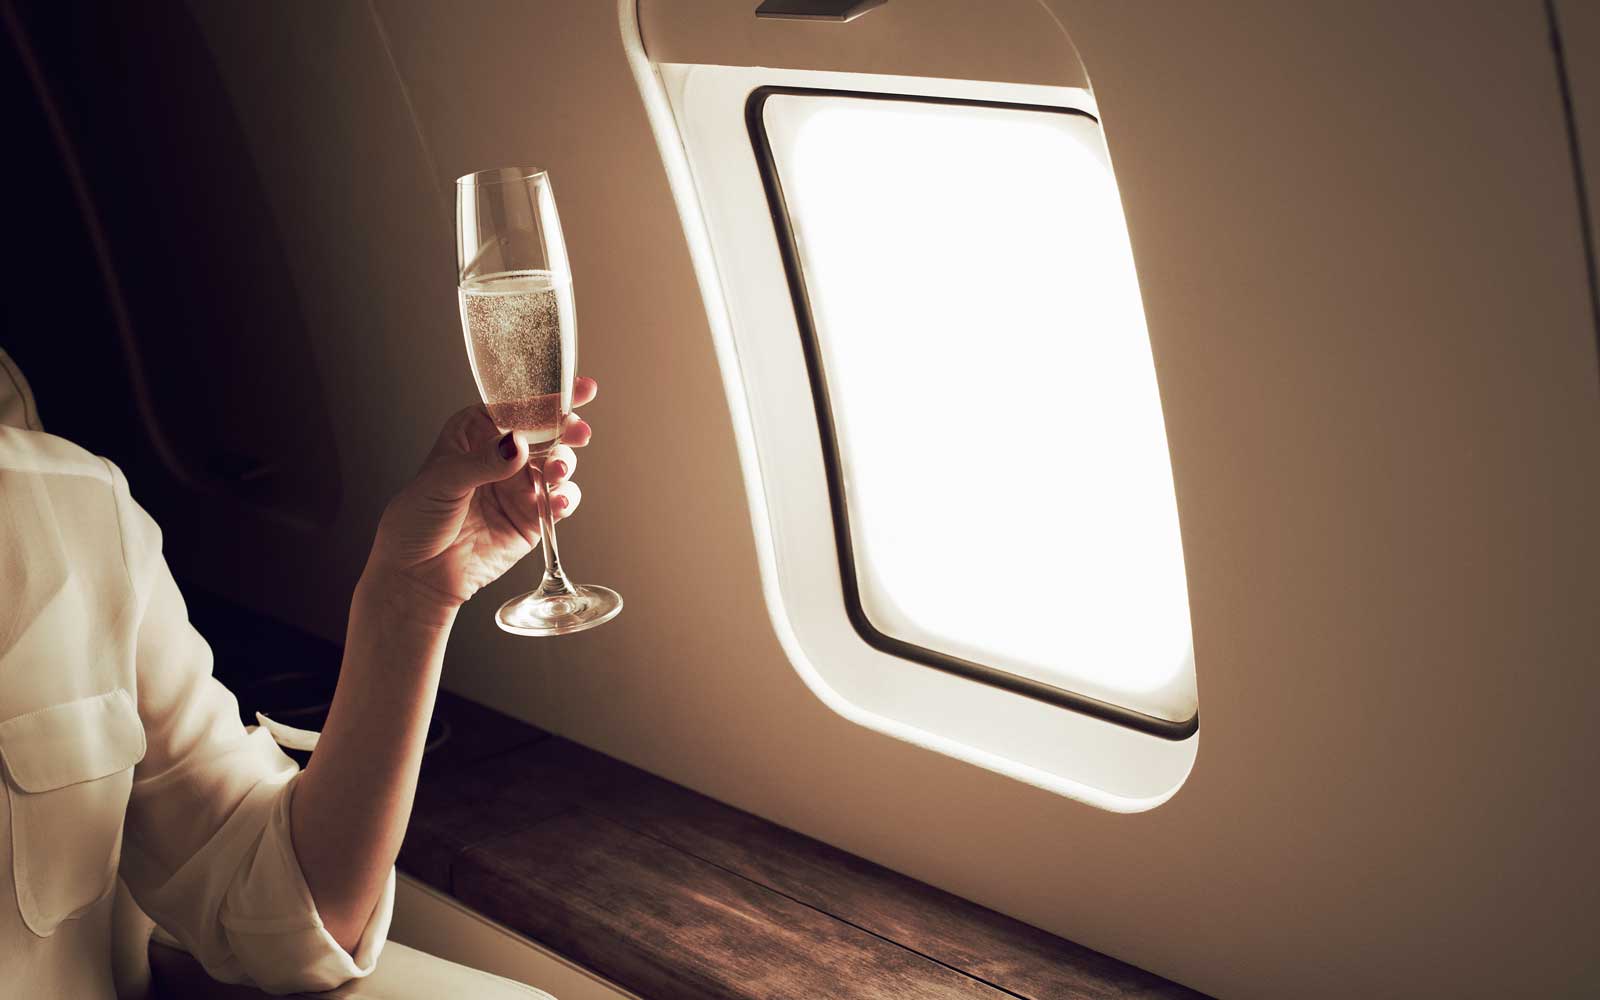 Businesswoman relaxing aboard private jet